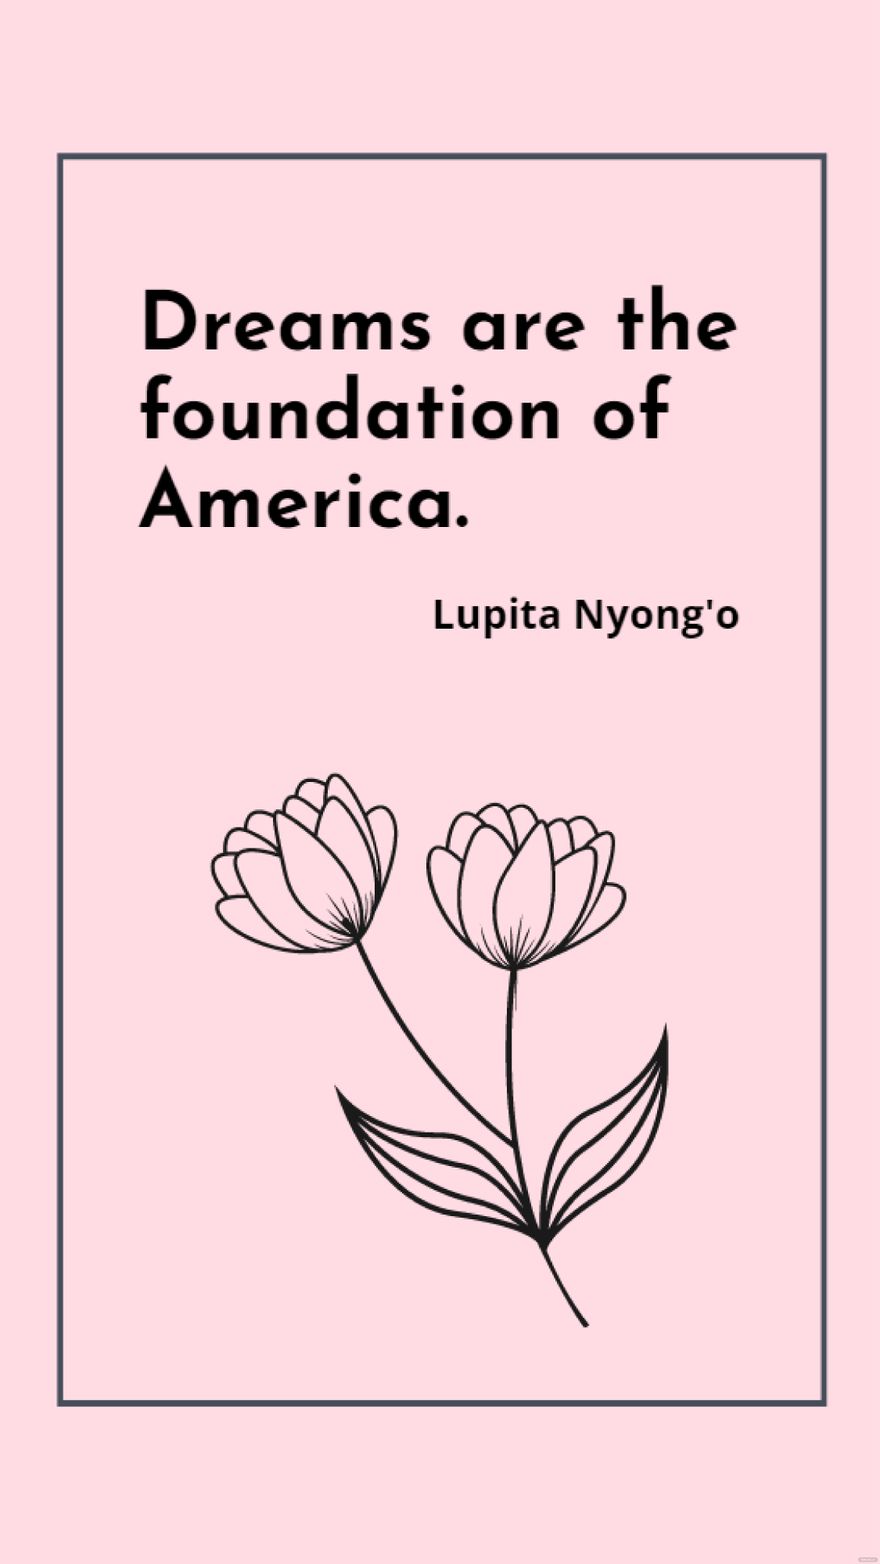 Free Lupita Nyong'o - Dreams are the foundation of America. in JPG